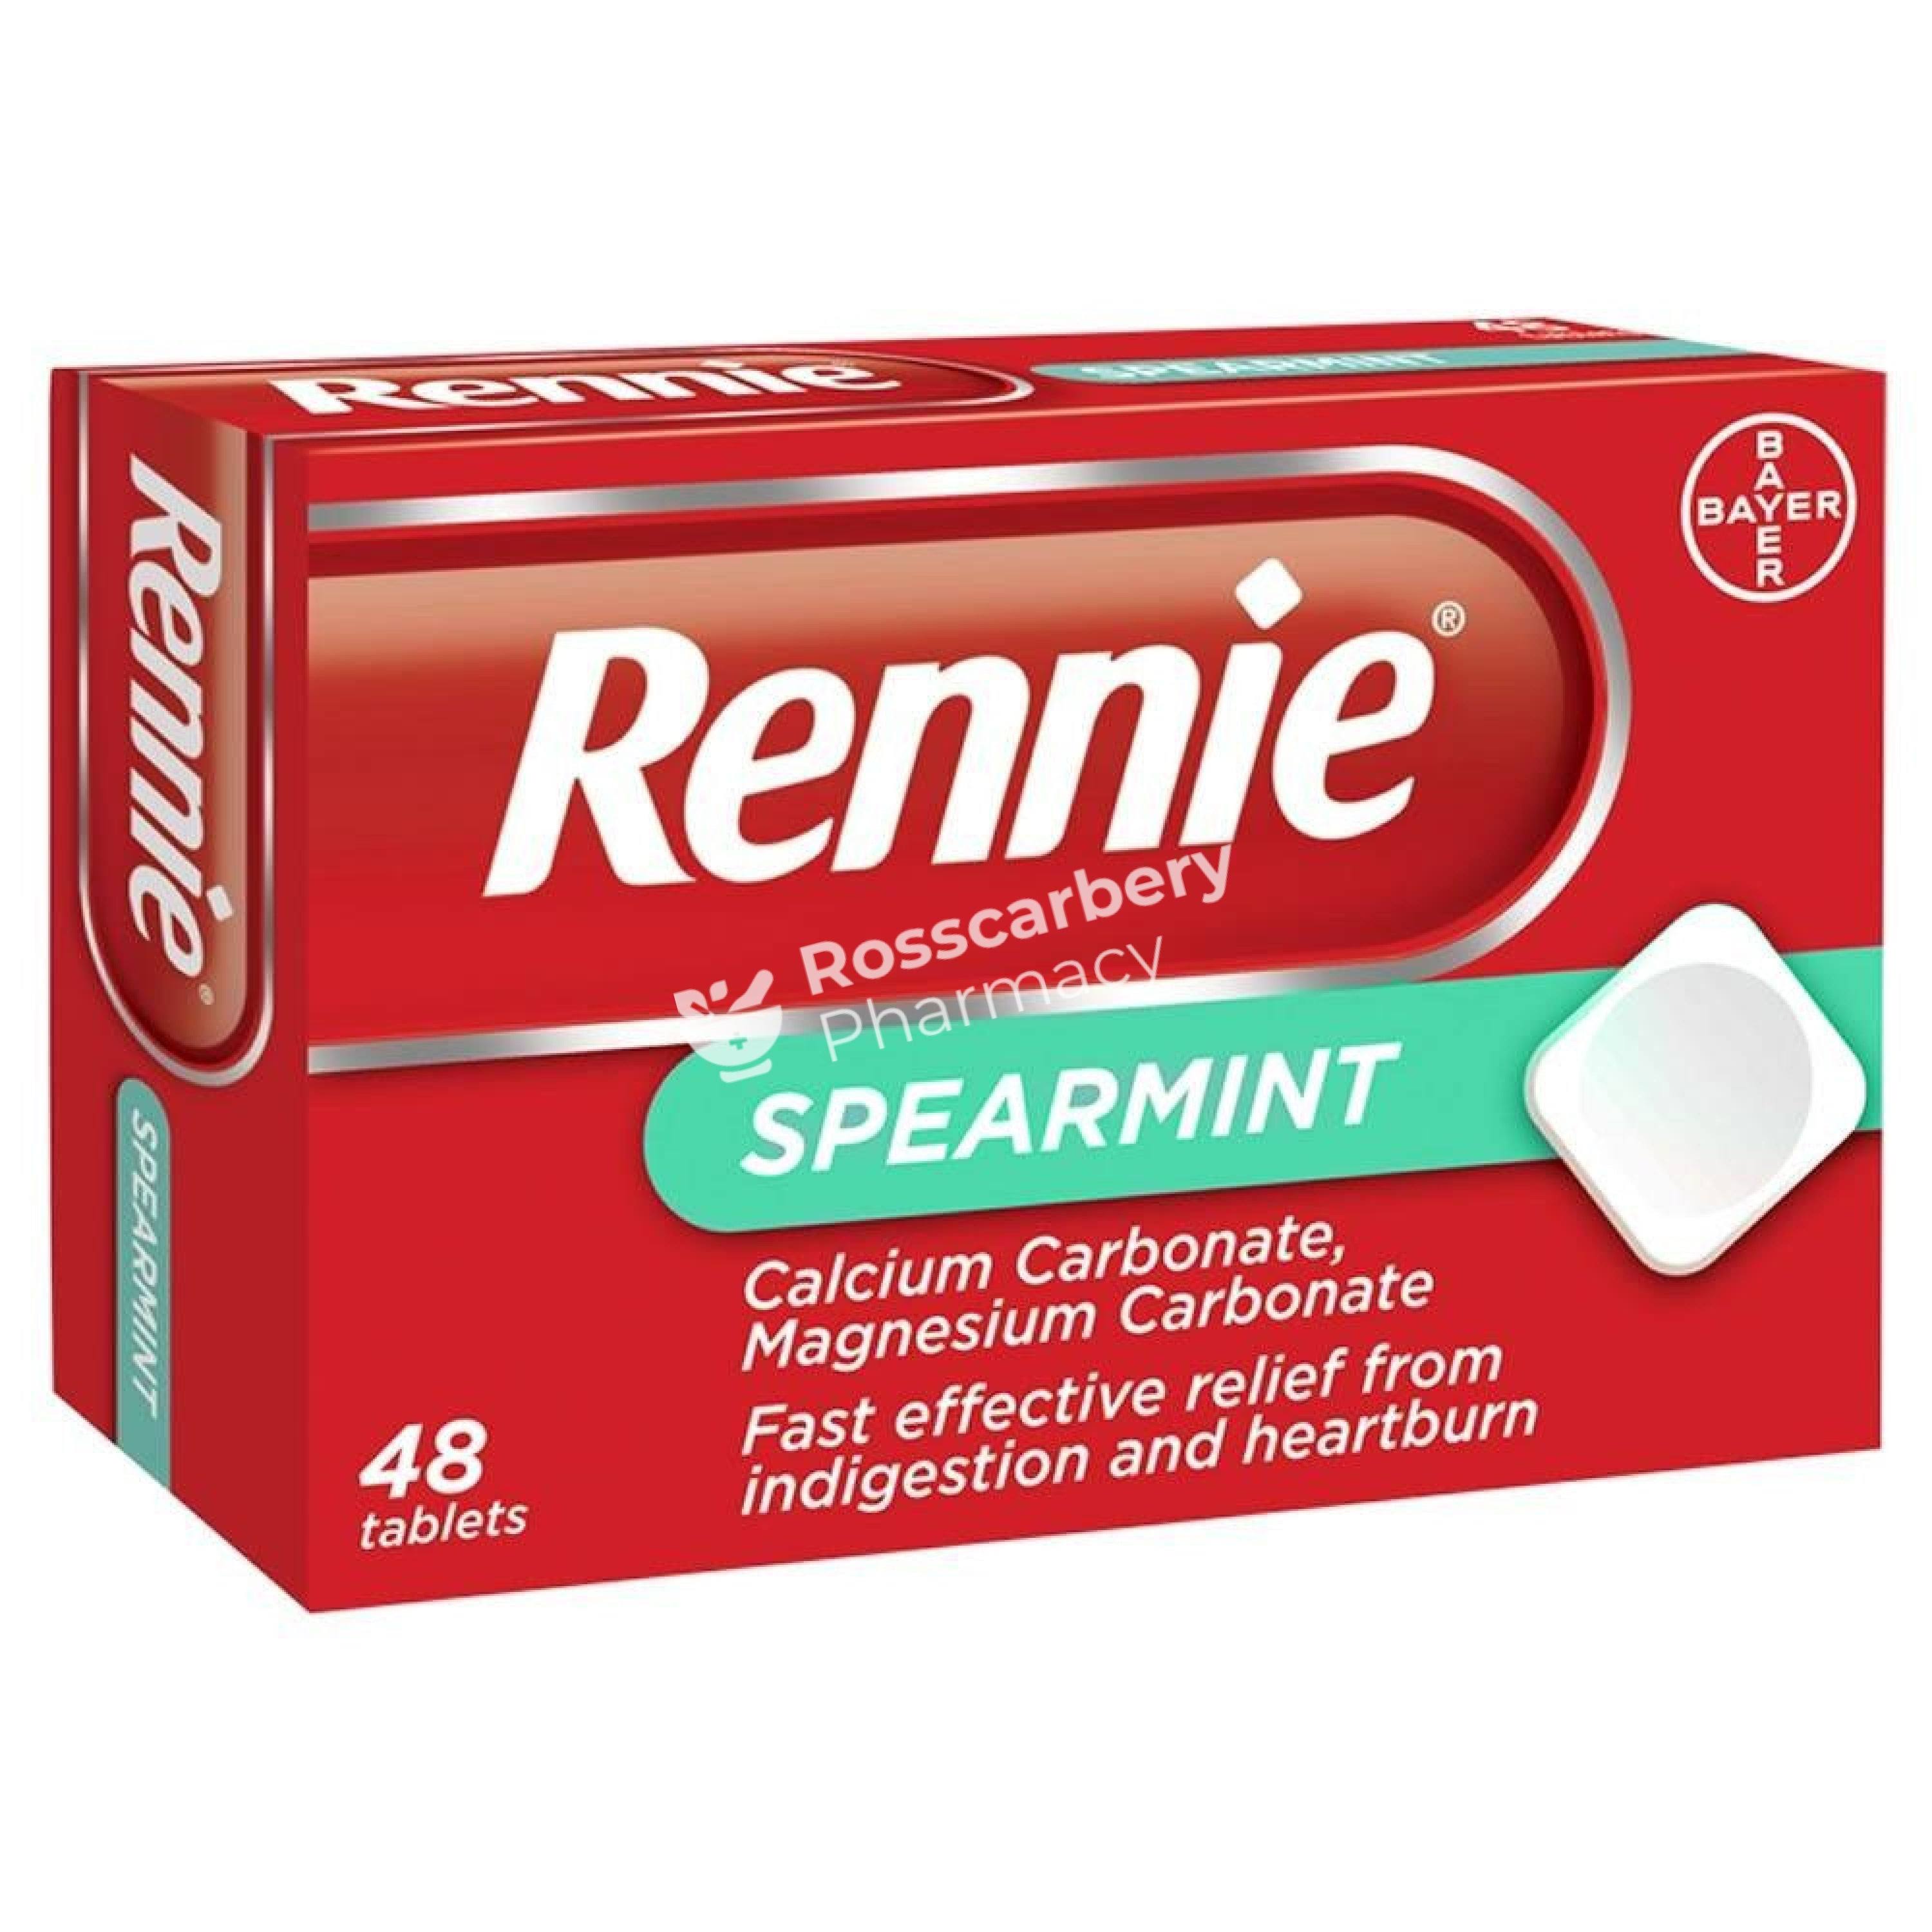 Rennie Relief from Indigestion and Heartburn - Spearmint, 48 Chewable Tablets